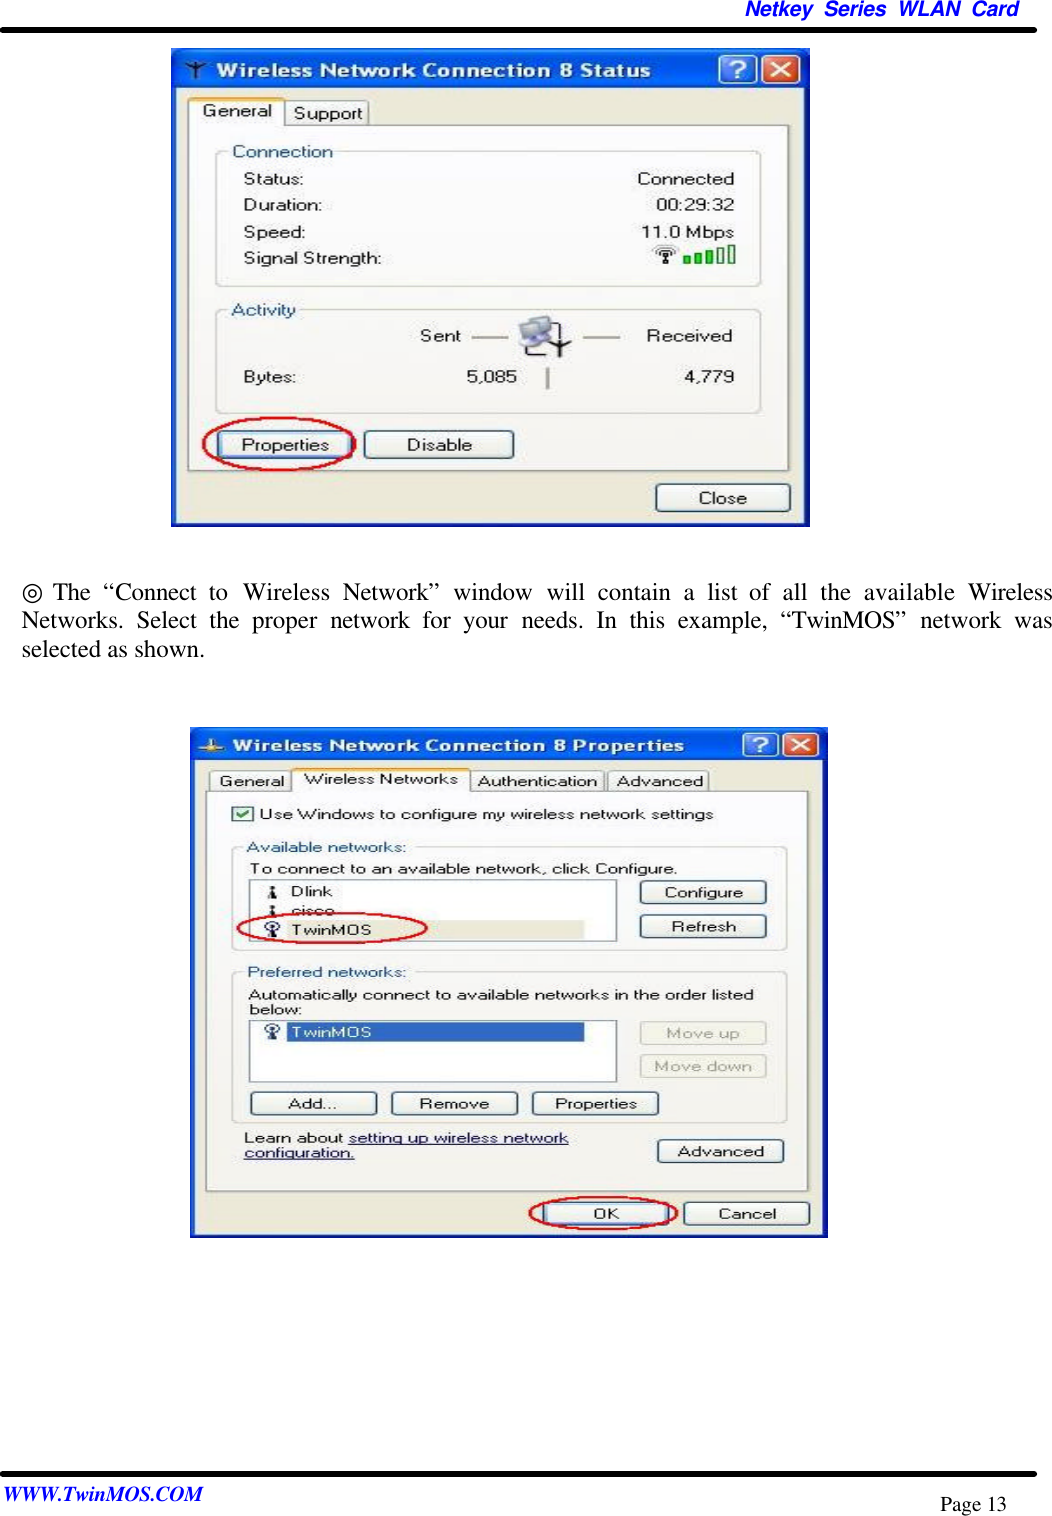   Netkey Series WLAN Card WWW.TwinMOS.COM Page 13              ◎ The “Connect to Wireless Network” window will contain a list of all the available Wireless Networks. Select the proper network for your needs. In this example, “TwinMOS”  network was selected as shown.                    